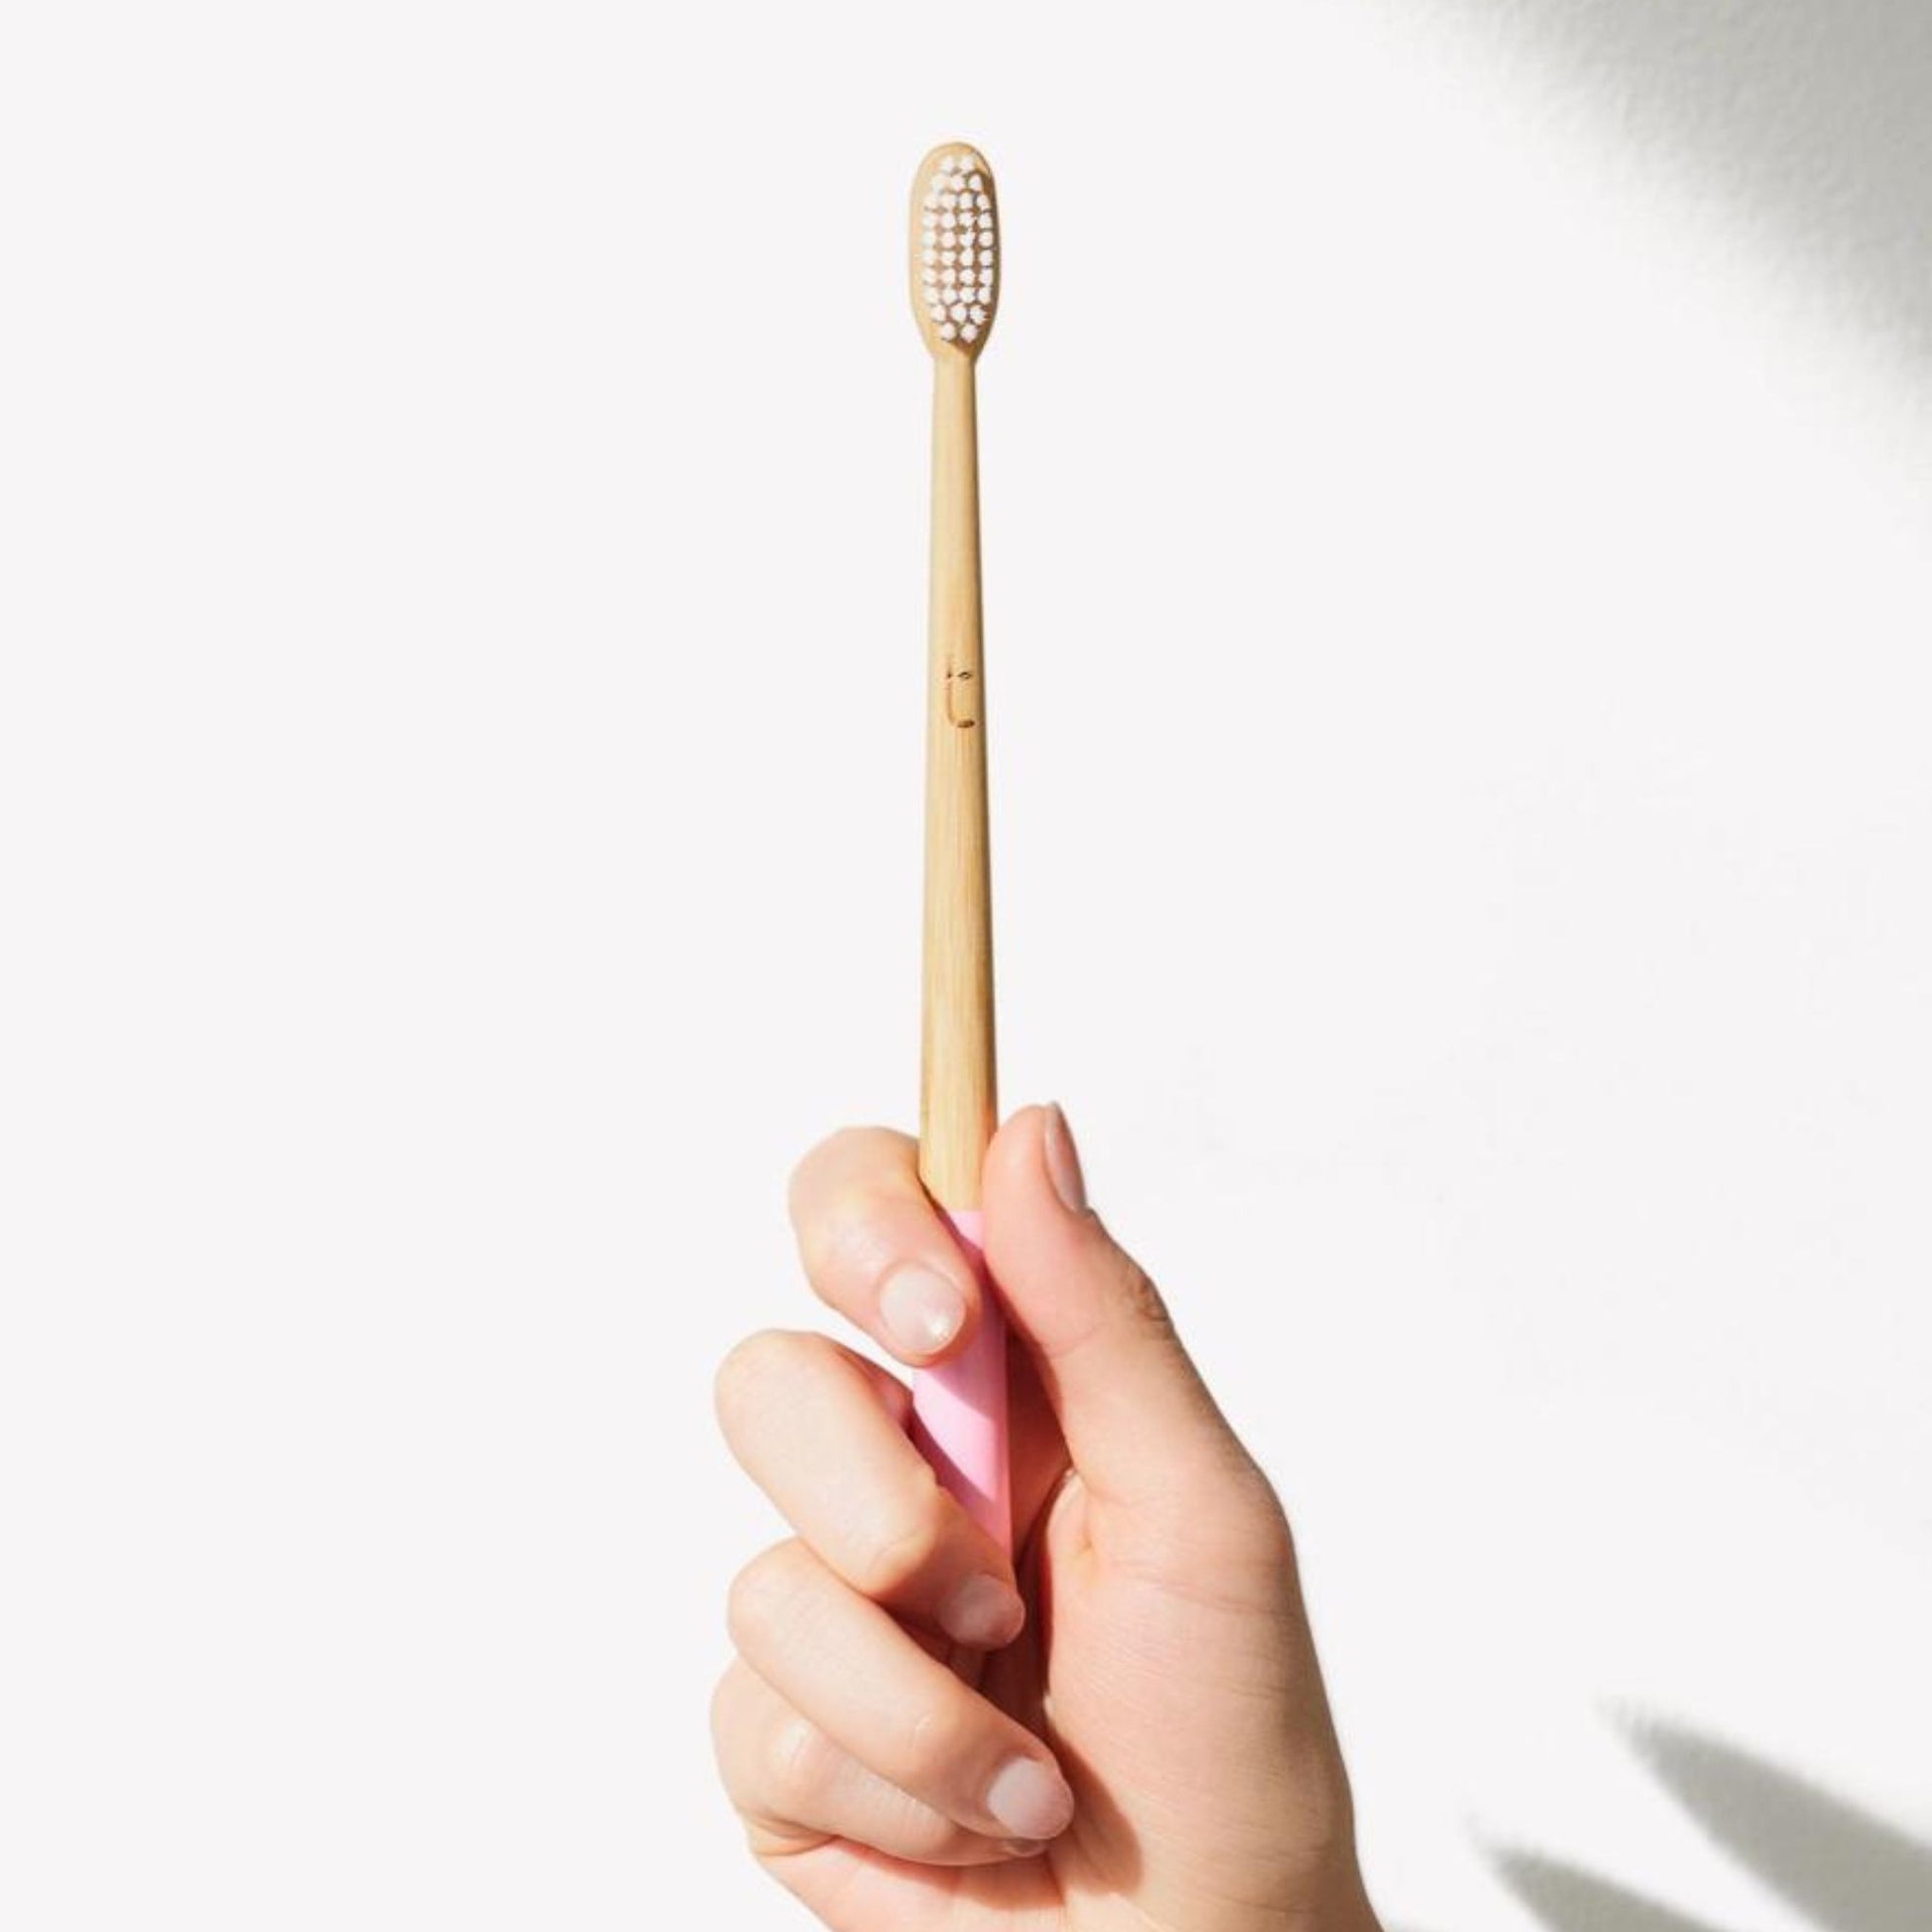 Bamboo toothbrush with Medium plant-based bristles in pink